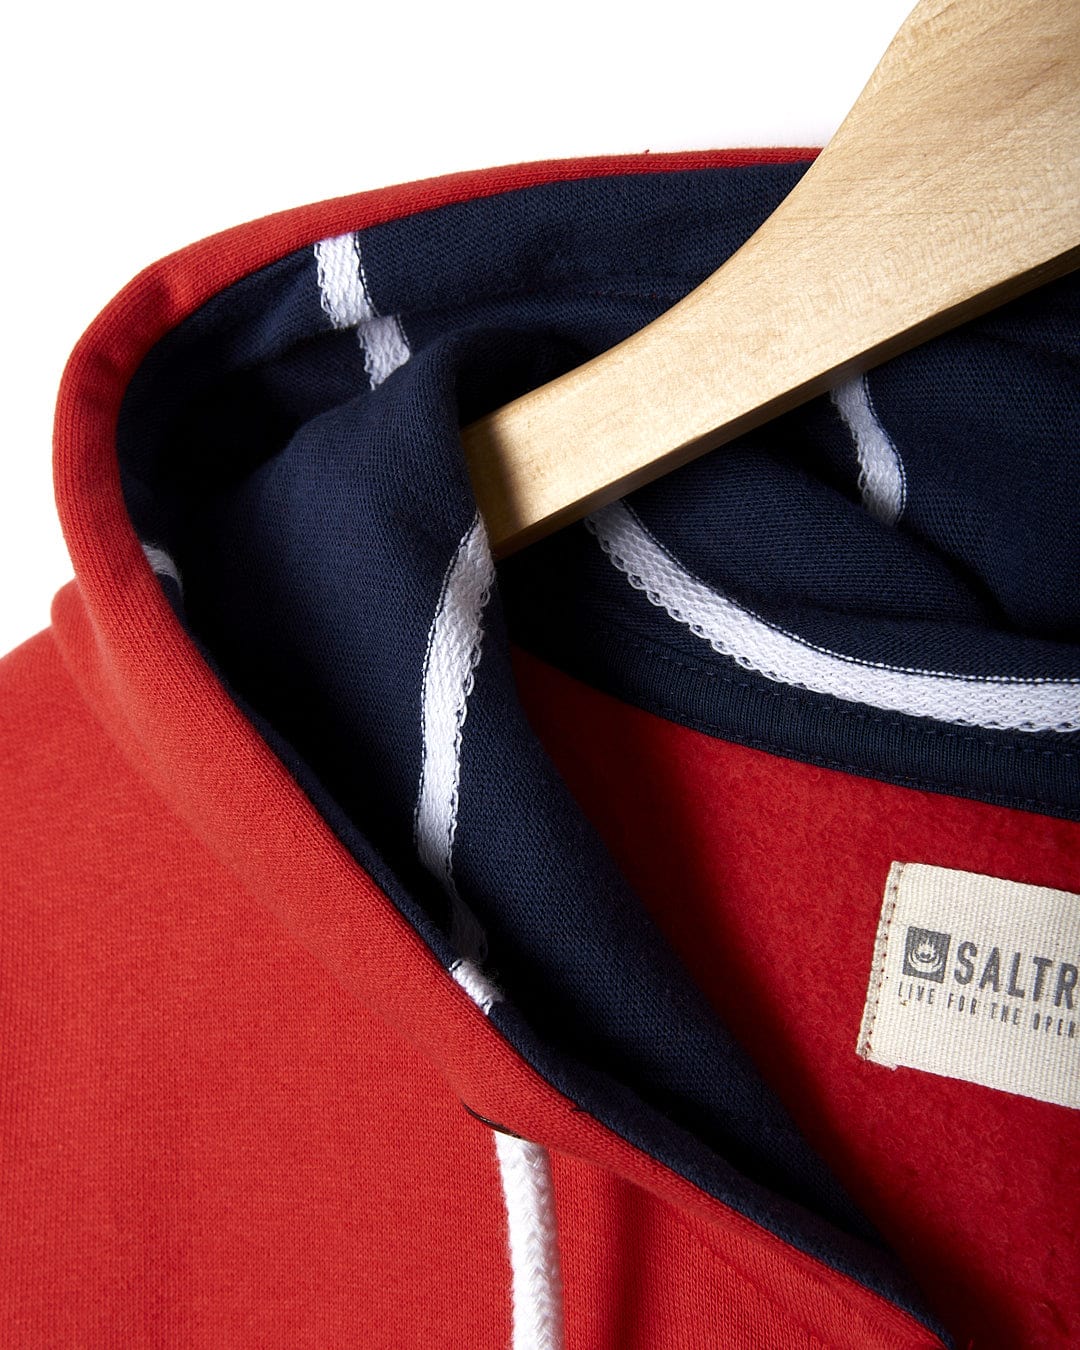 A Saltrock - Womens Zip Hoodie - Red and navy hanging on a wooden hanger.